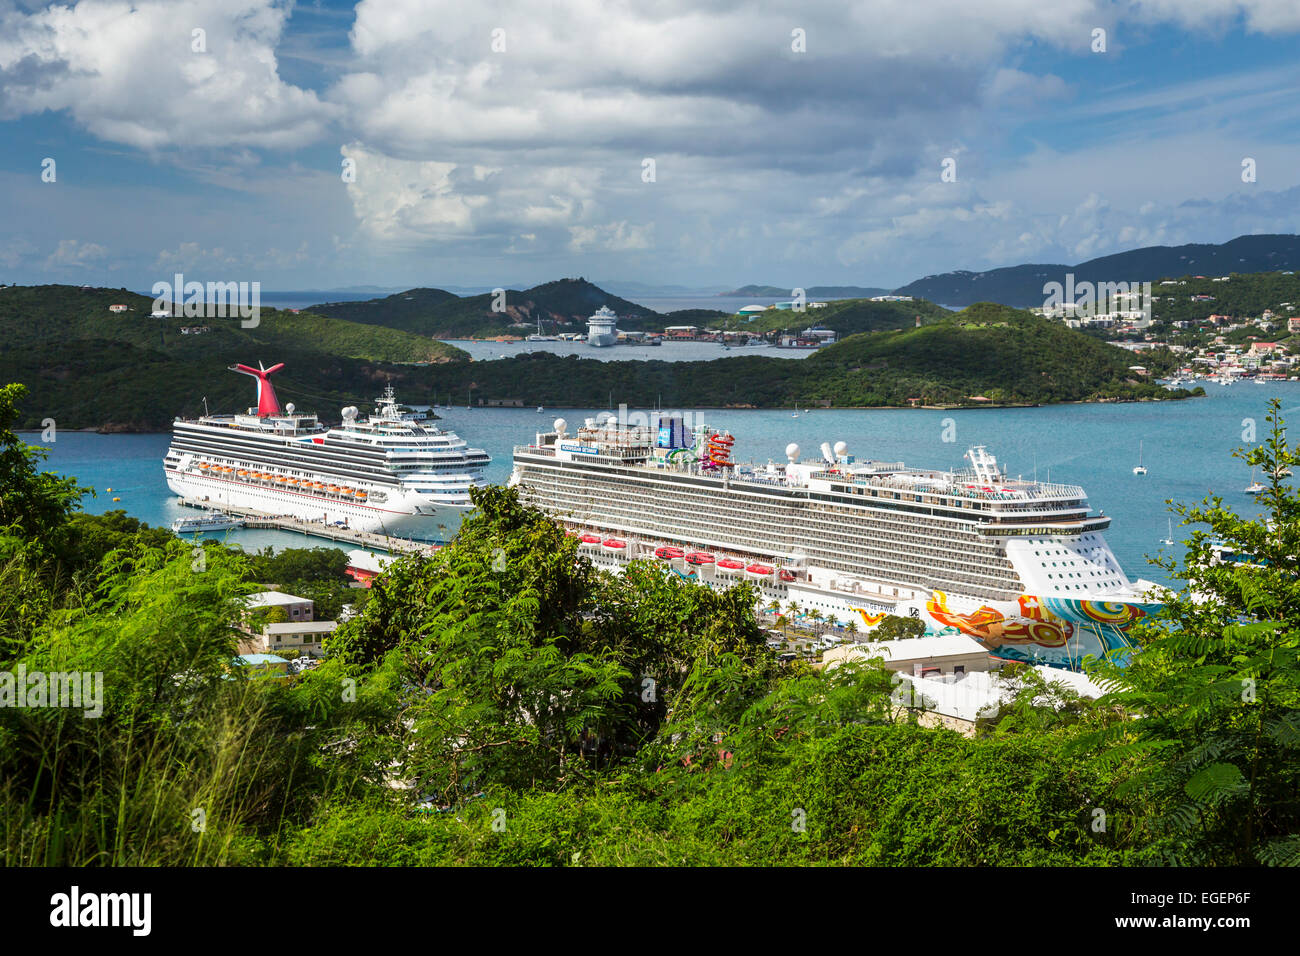 Cruise ships docked at the Havensight Pier in Charlotte Amalie, St. Thomas, US Virgin Islands, Caribbean. Stock Photo